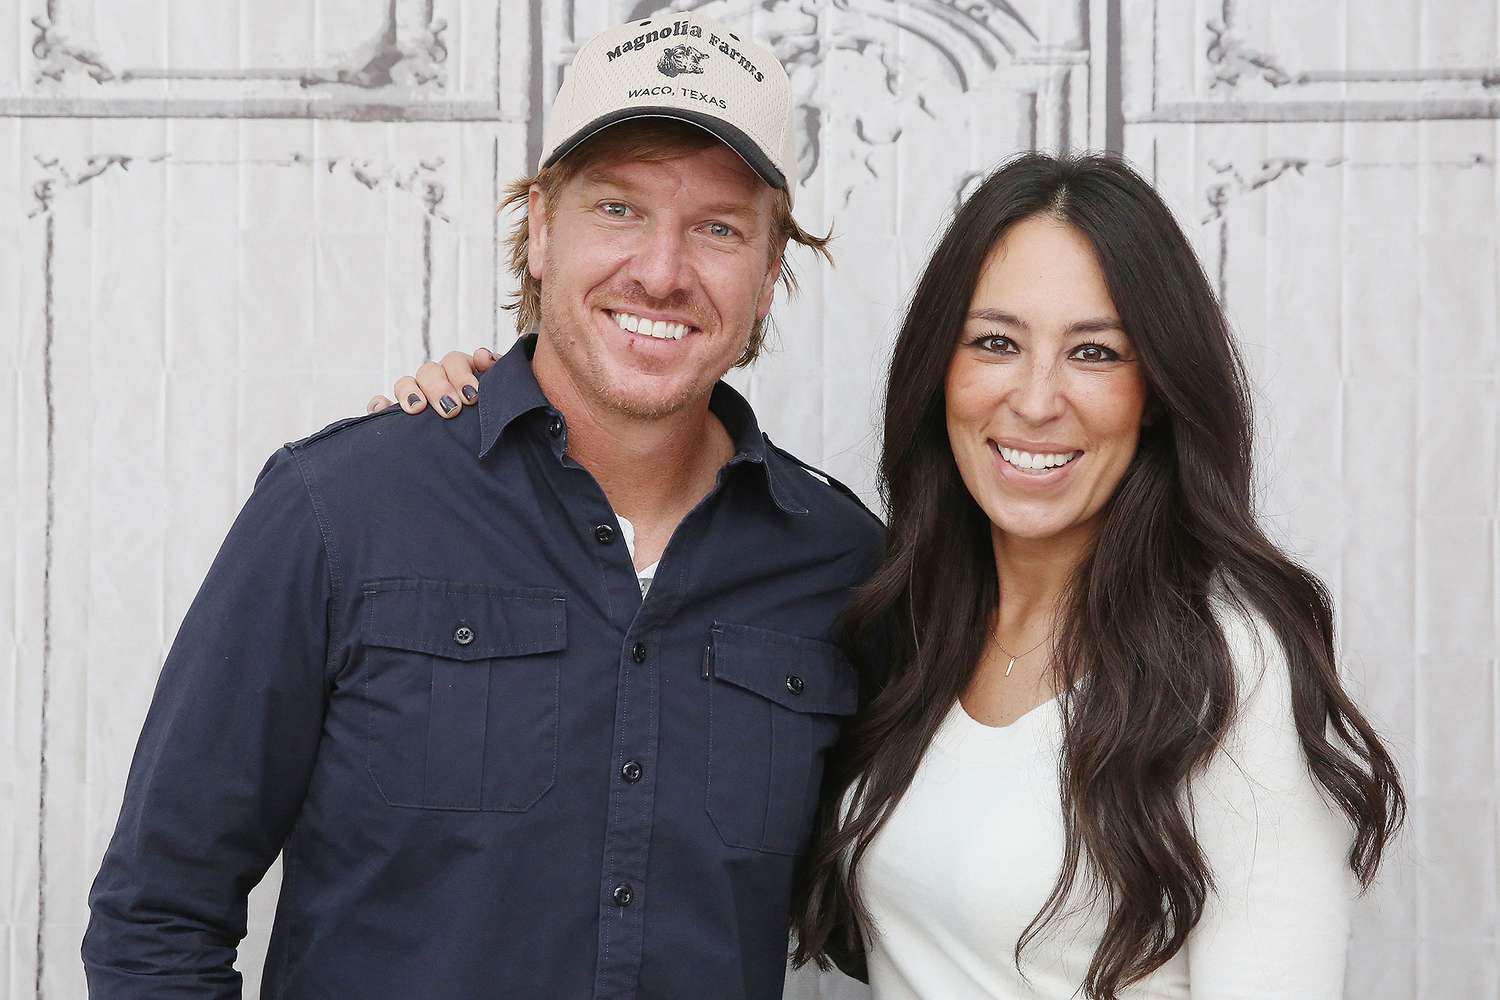 The Build Series Presents Chip & Joanna Gaines Discussing Their New Book "The Magnolia Story"